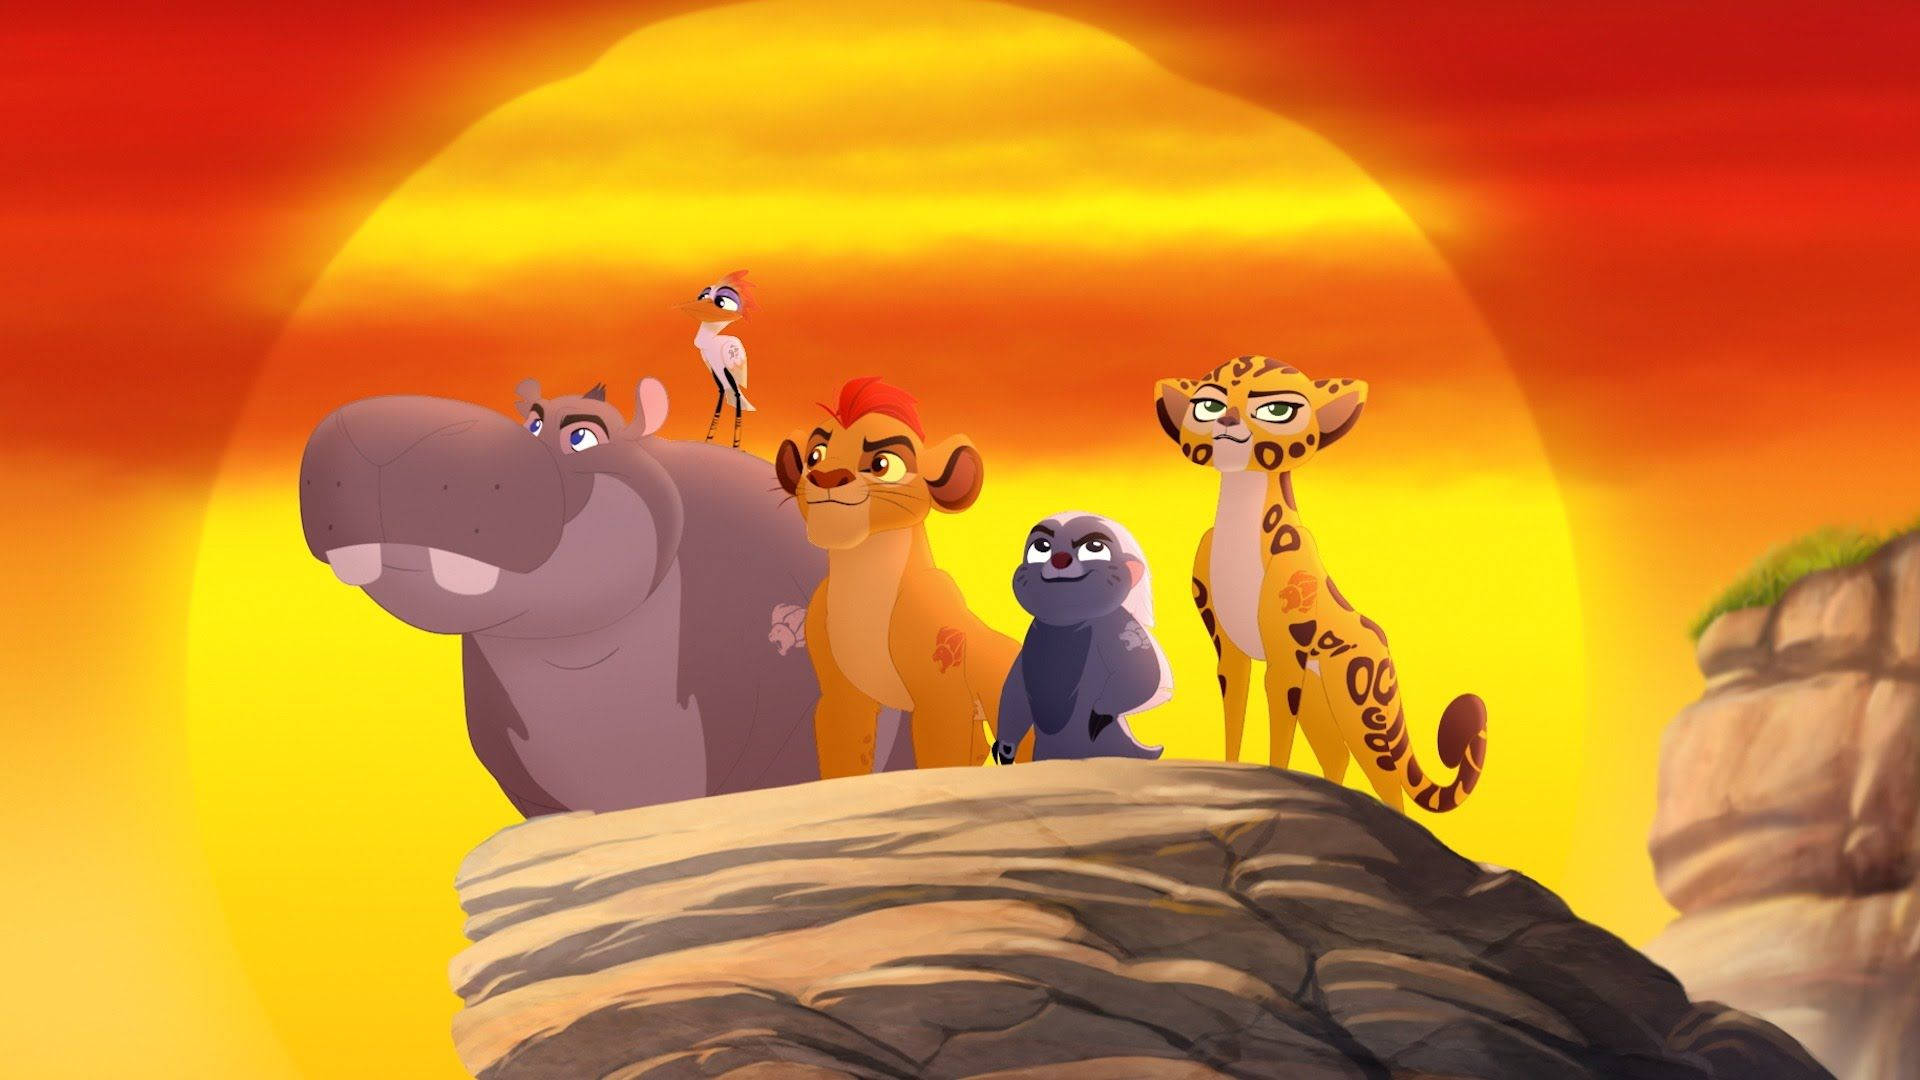 Witness the legendary Lion King and his courageous Lion Guard take on the enemy to protect their pride! Wallpaper